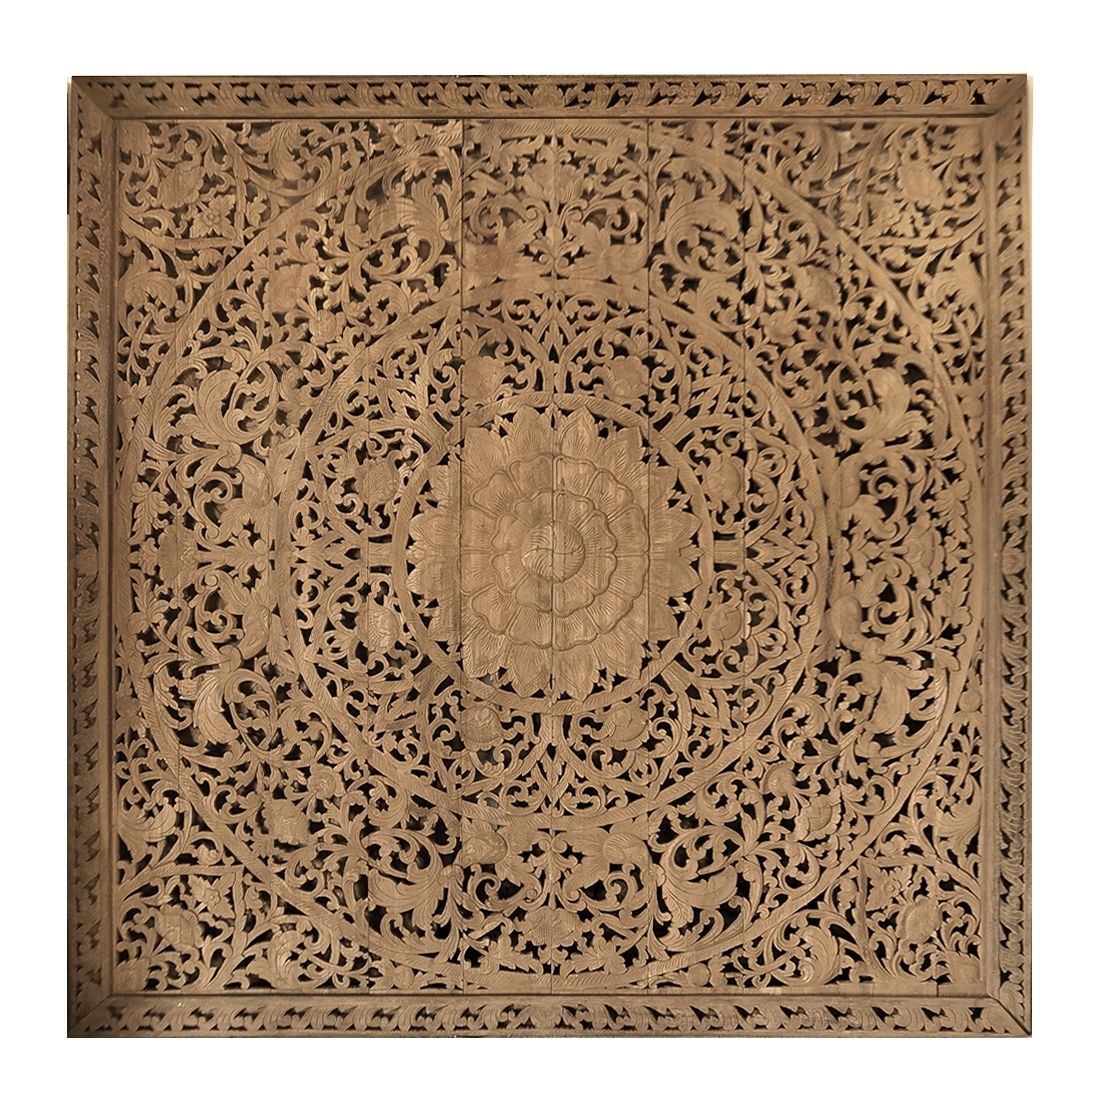 Buy Large Grand Carved Wooden Wall Art Or Ceiling Panel Online Regarding Wood Wall Art (View 20 of 20)